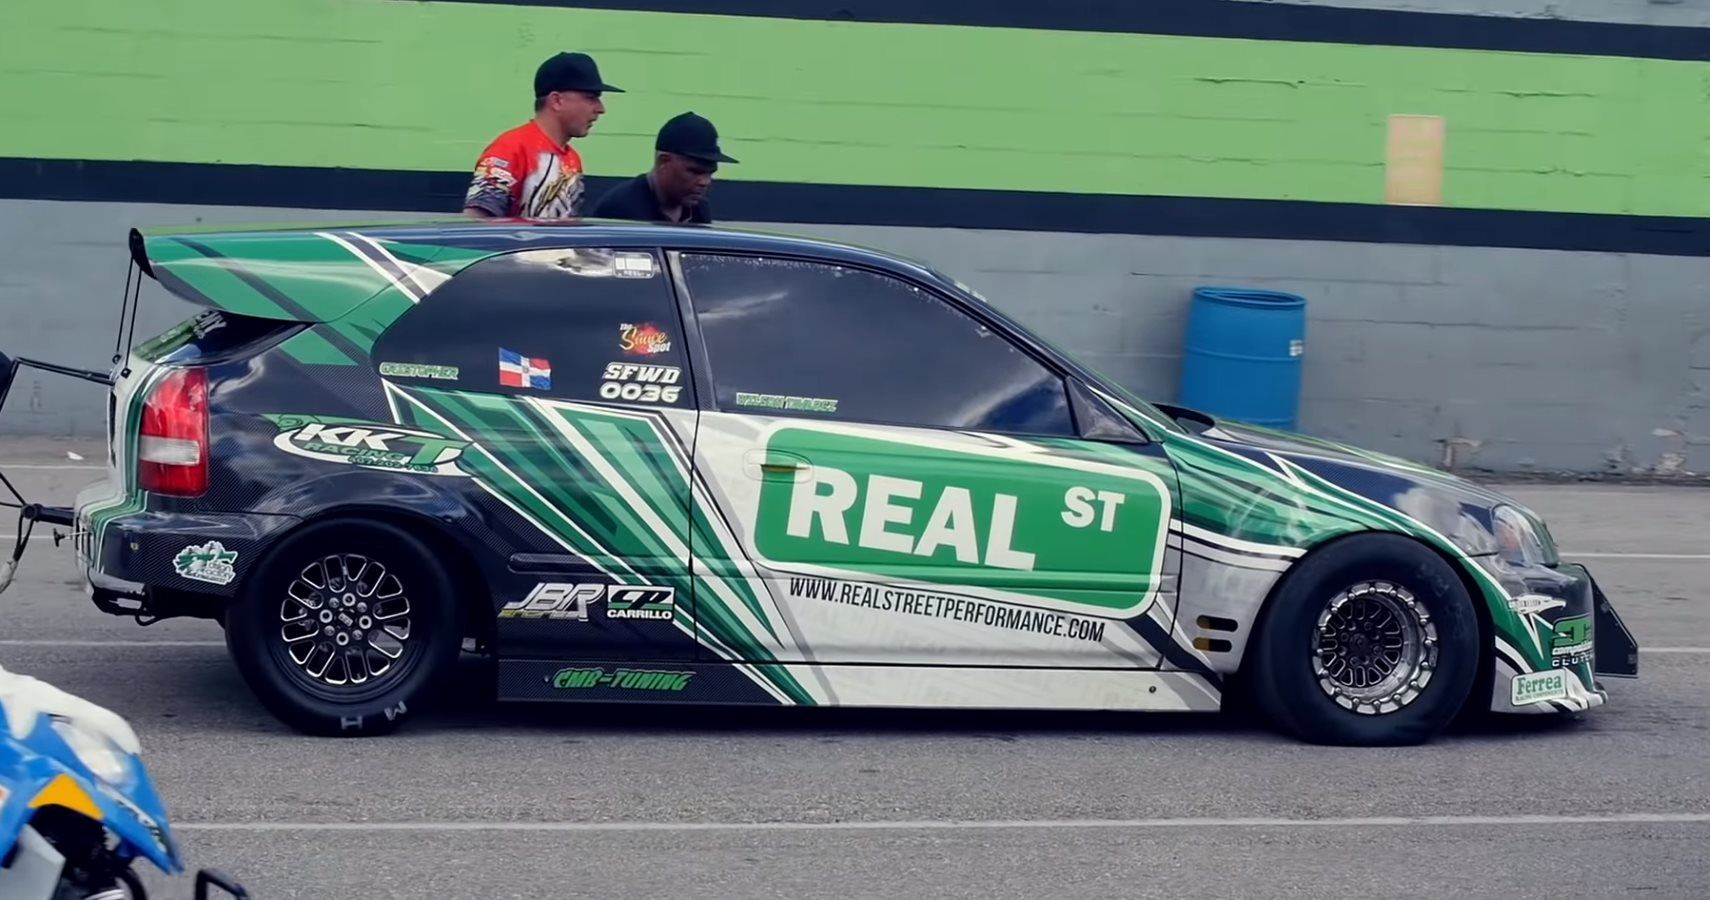 Watch A Tuned 1300 HP AWD Honda Civic In Action